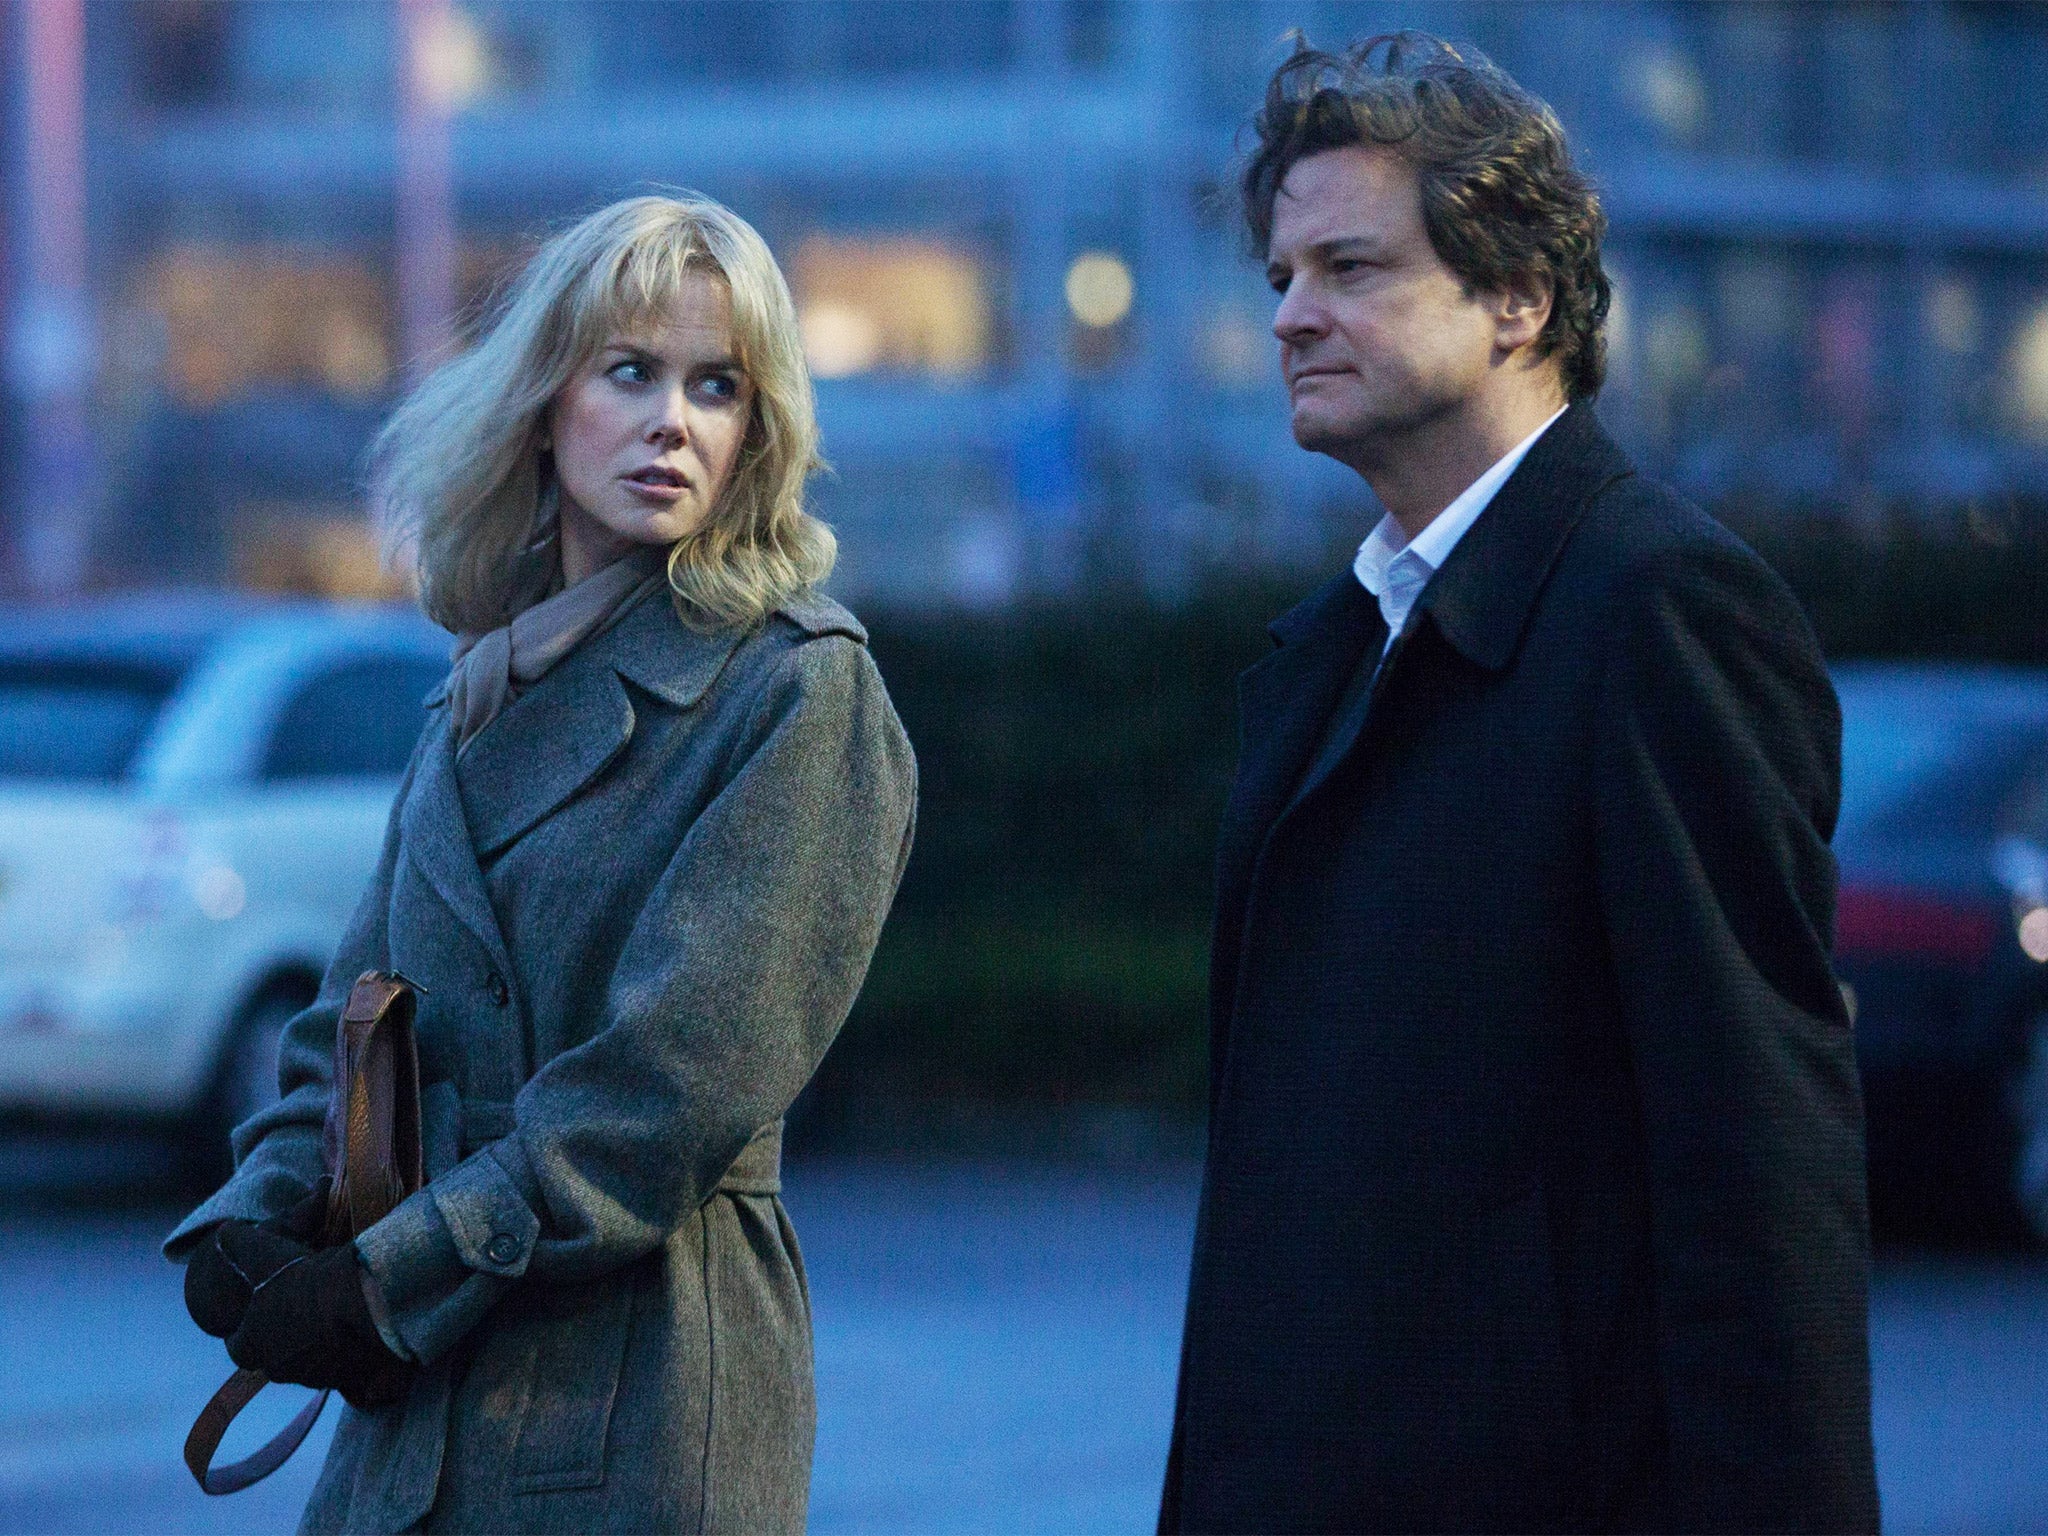 Eyes wide open: Nicole Kidman and Colin Firth in ‘Before I Go to Sleep’